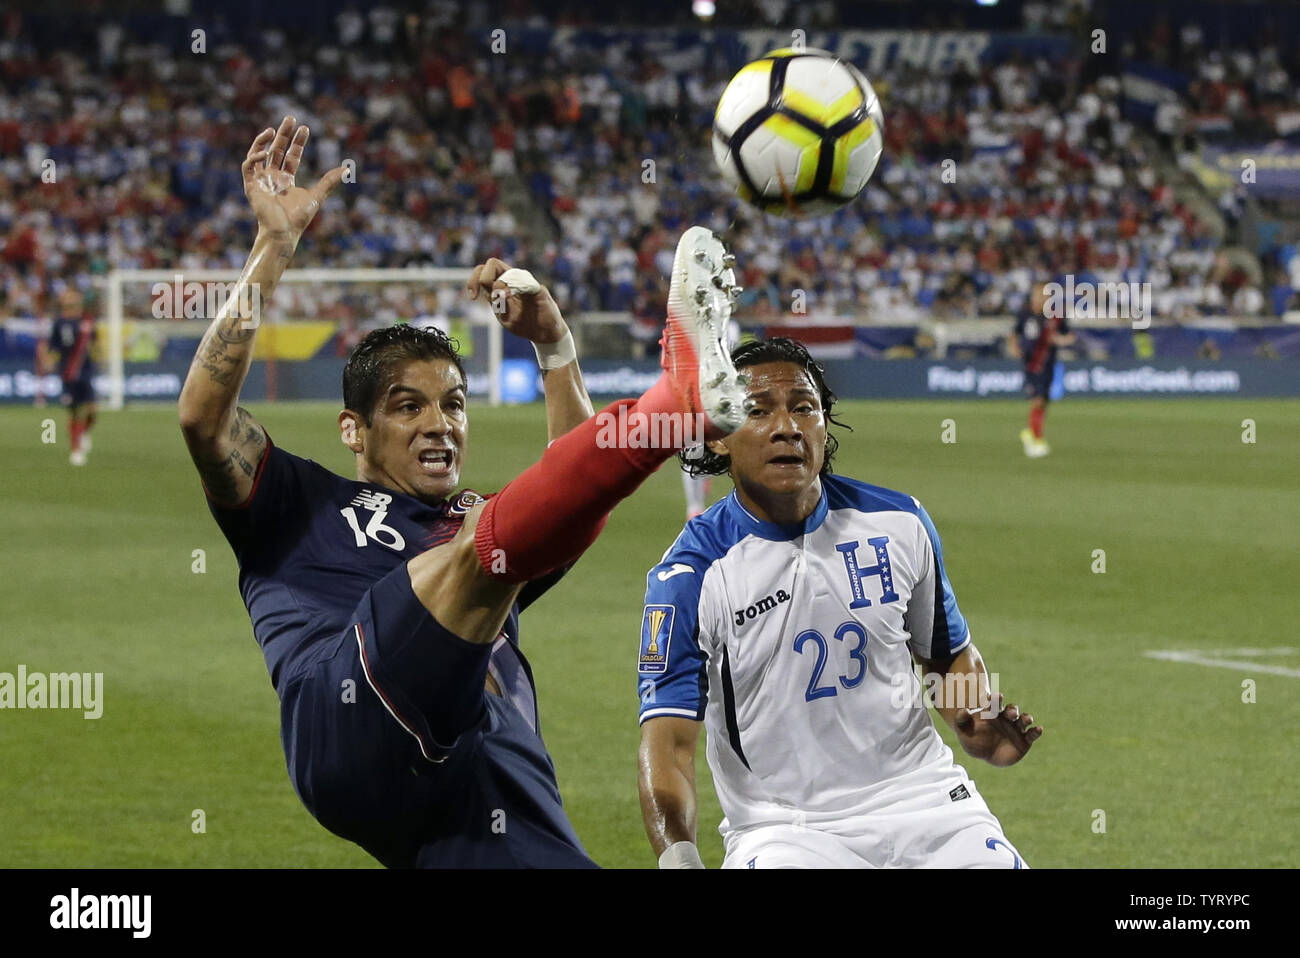 Honduras Carlos Sanchez watches Costa Rica Christian Gamboa kick the ball in the first half at the Concacaf Gold Cup 2017 at Red Bull Arena in Harrison New Jersey on July 7, 2017.   Photo by John Angelillo/UPI Stock Photo